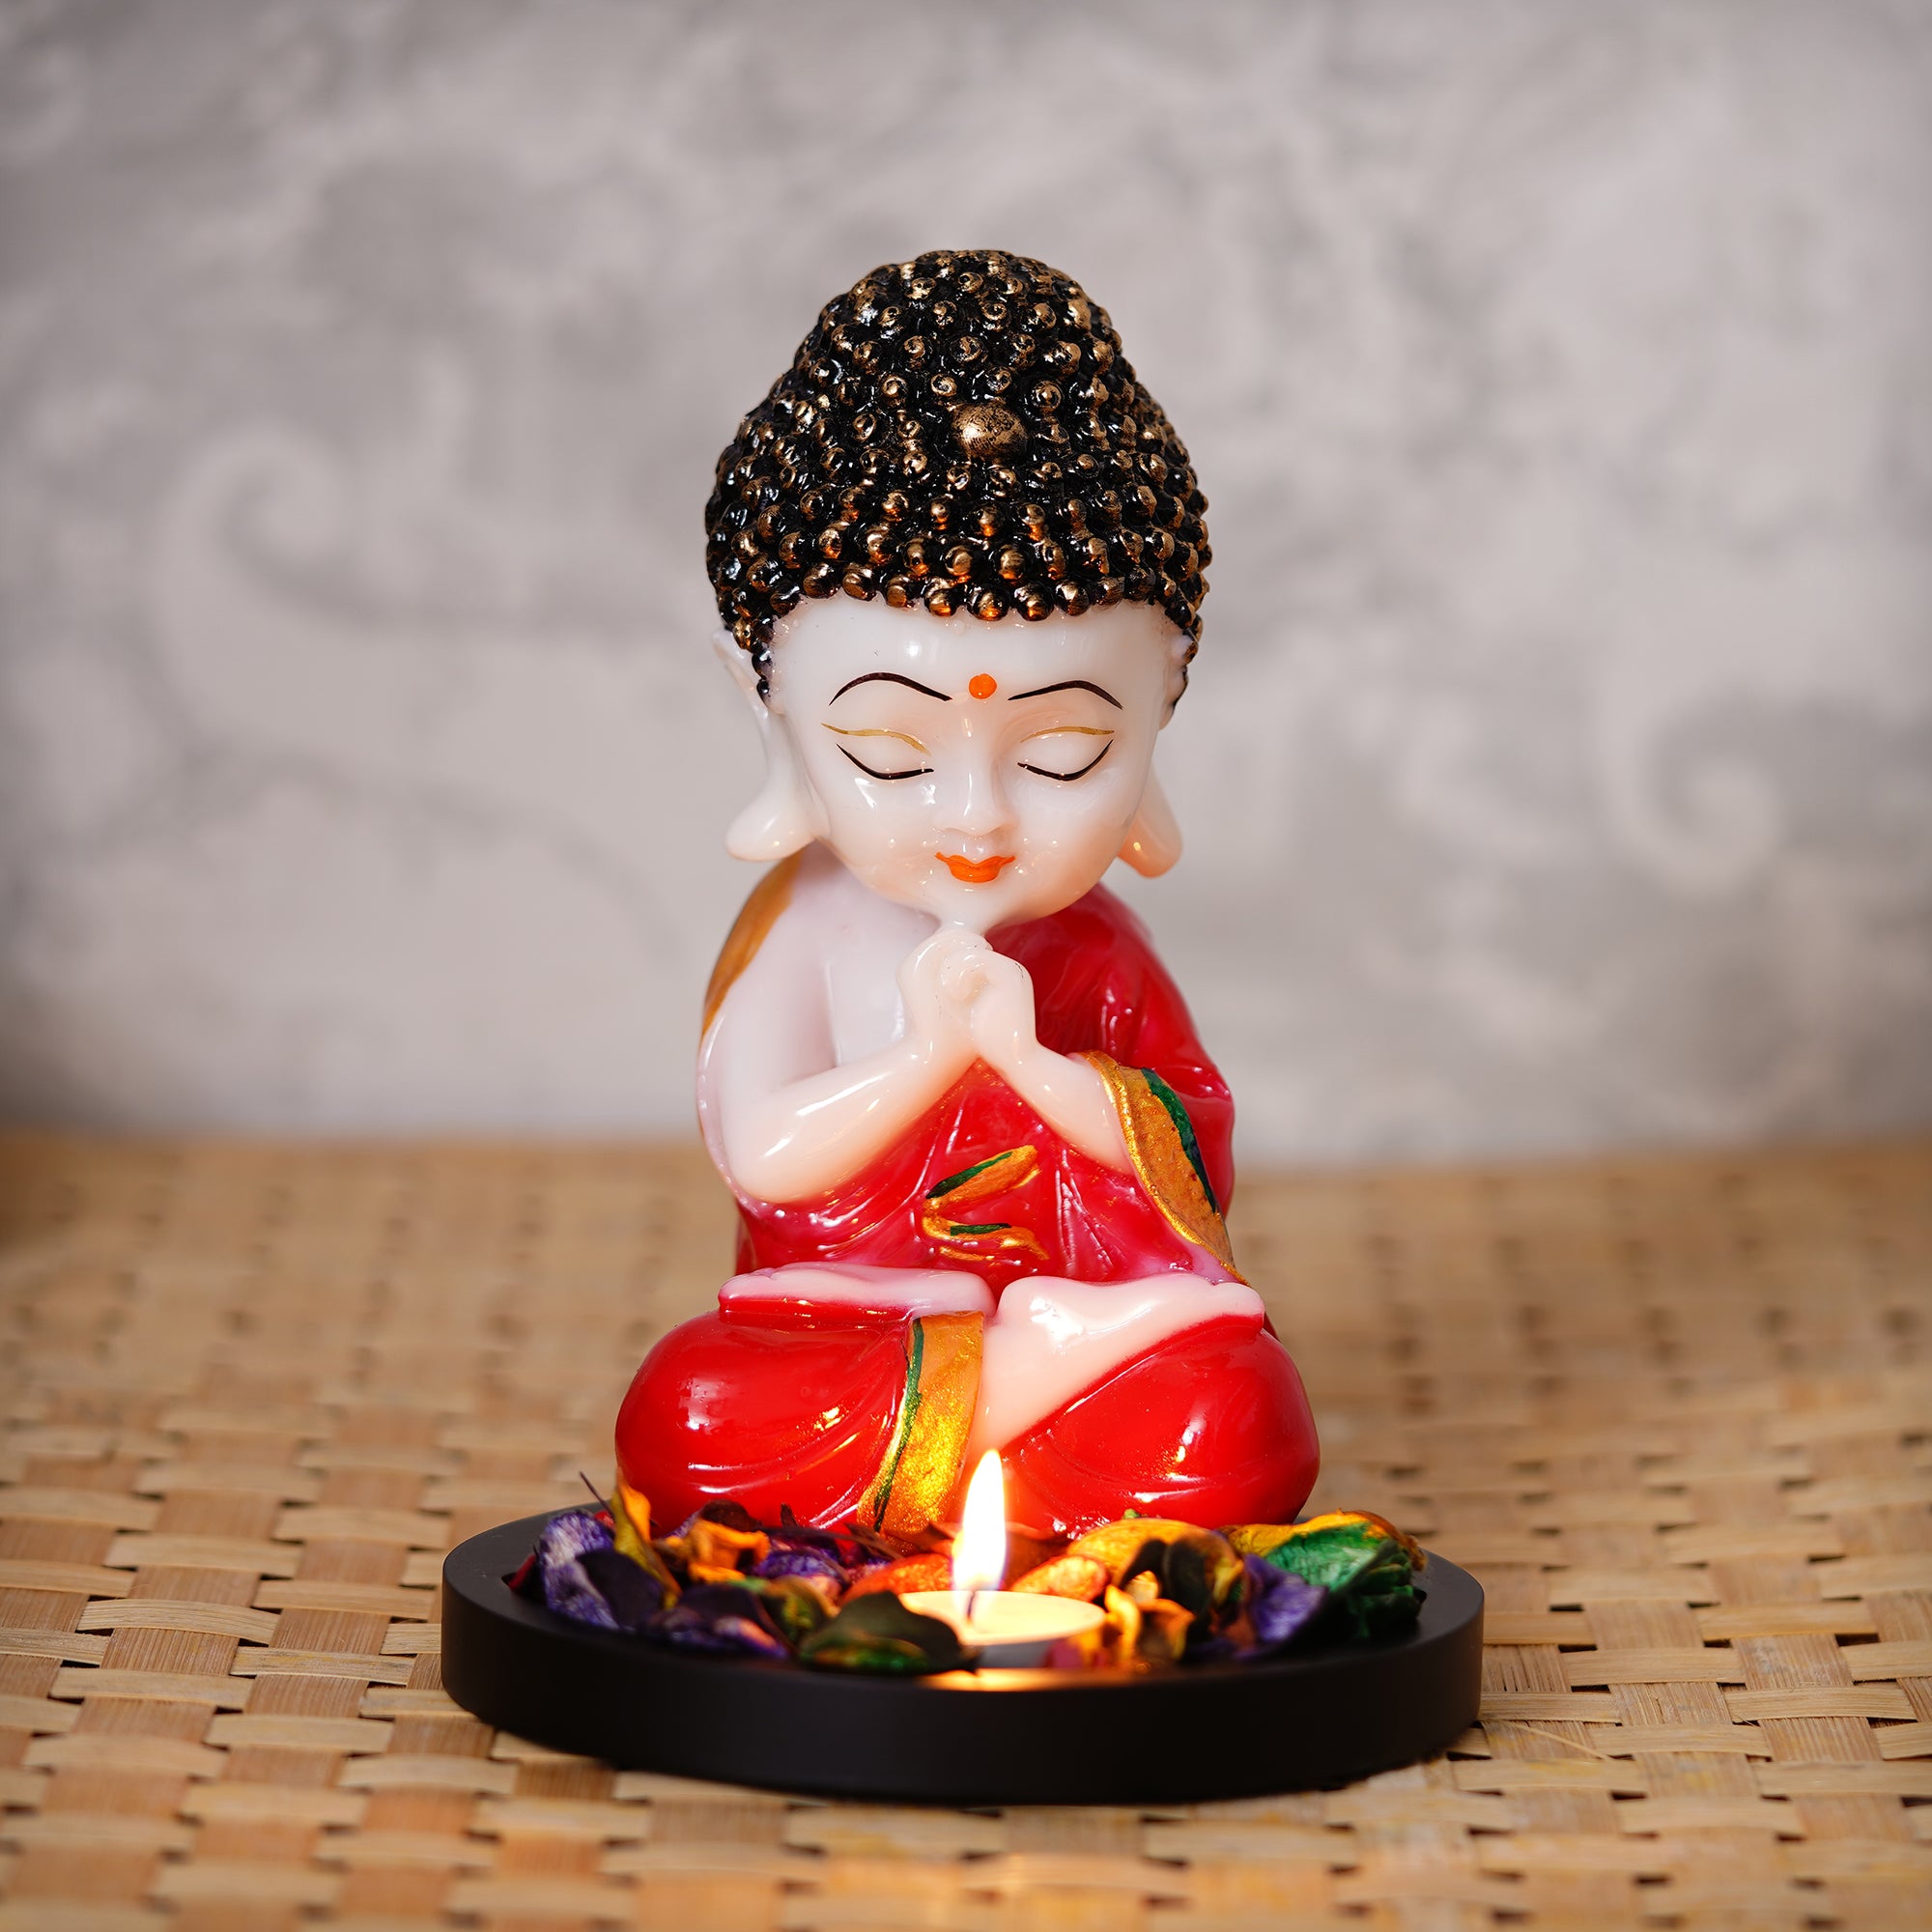 Designer Pearl Rakhi with Praying Red Monk Buddha with Wooden Base, Fragranced Petals and Tealight and Roli Chawal Pack, Best Wishes Greeting Card 2